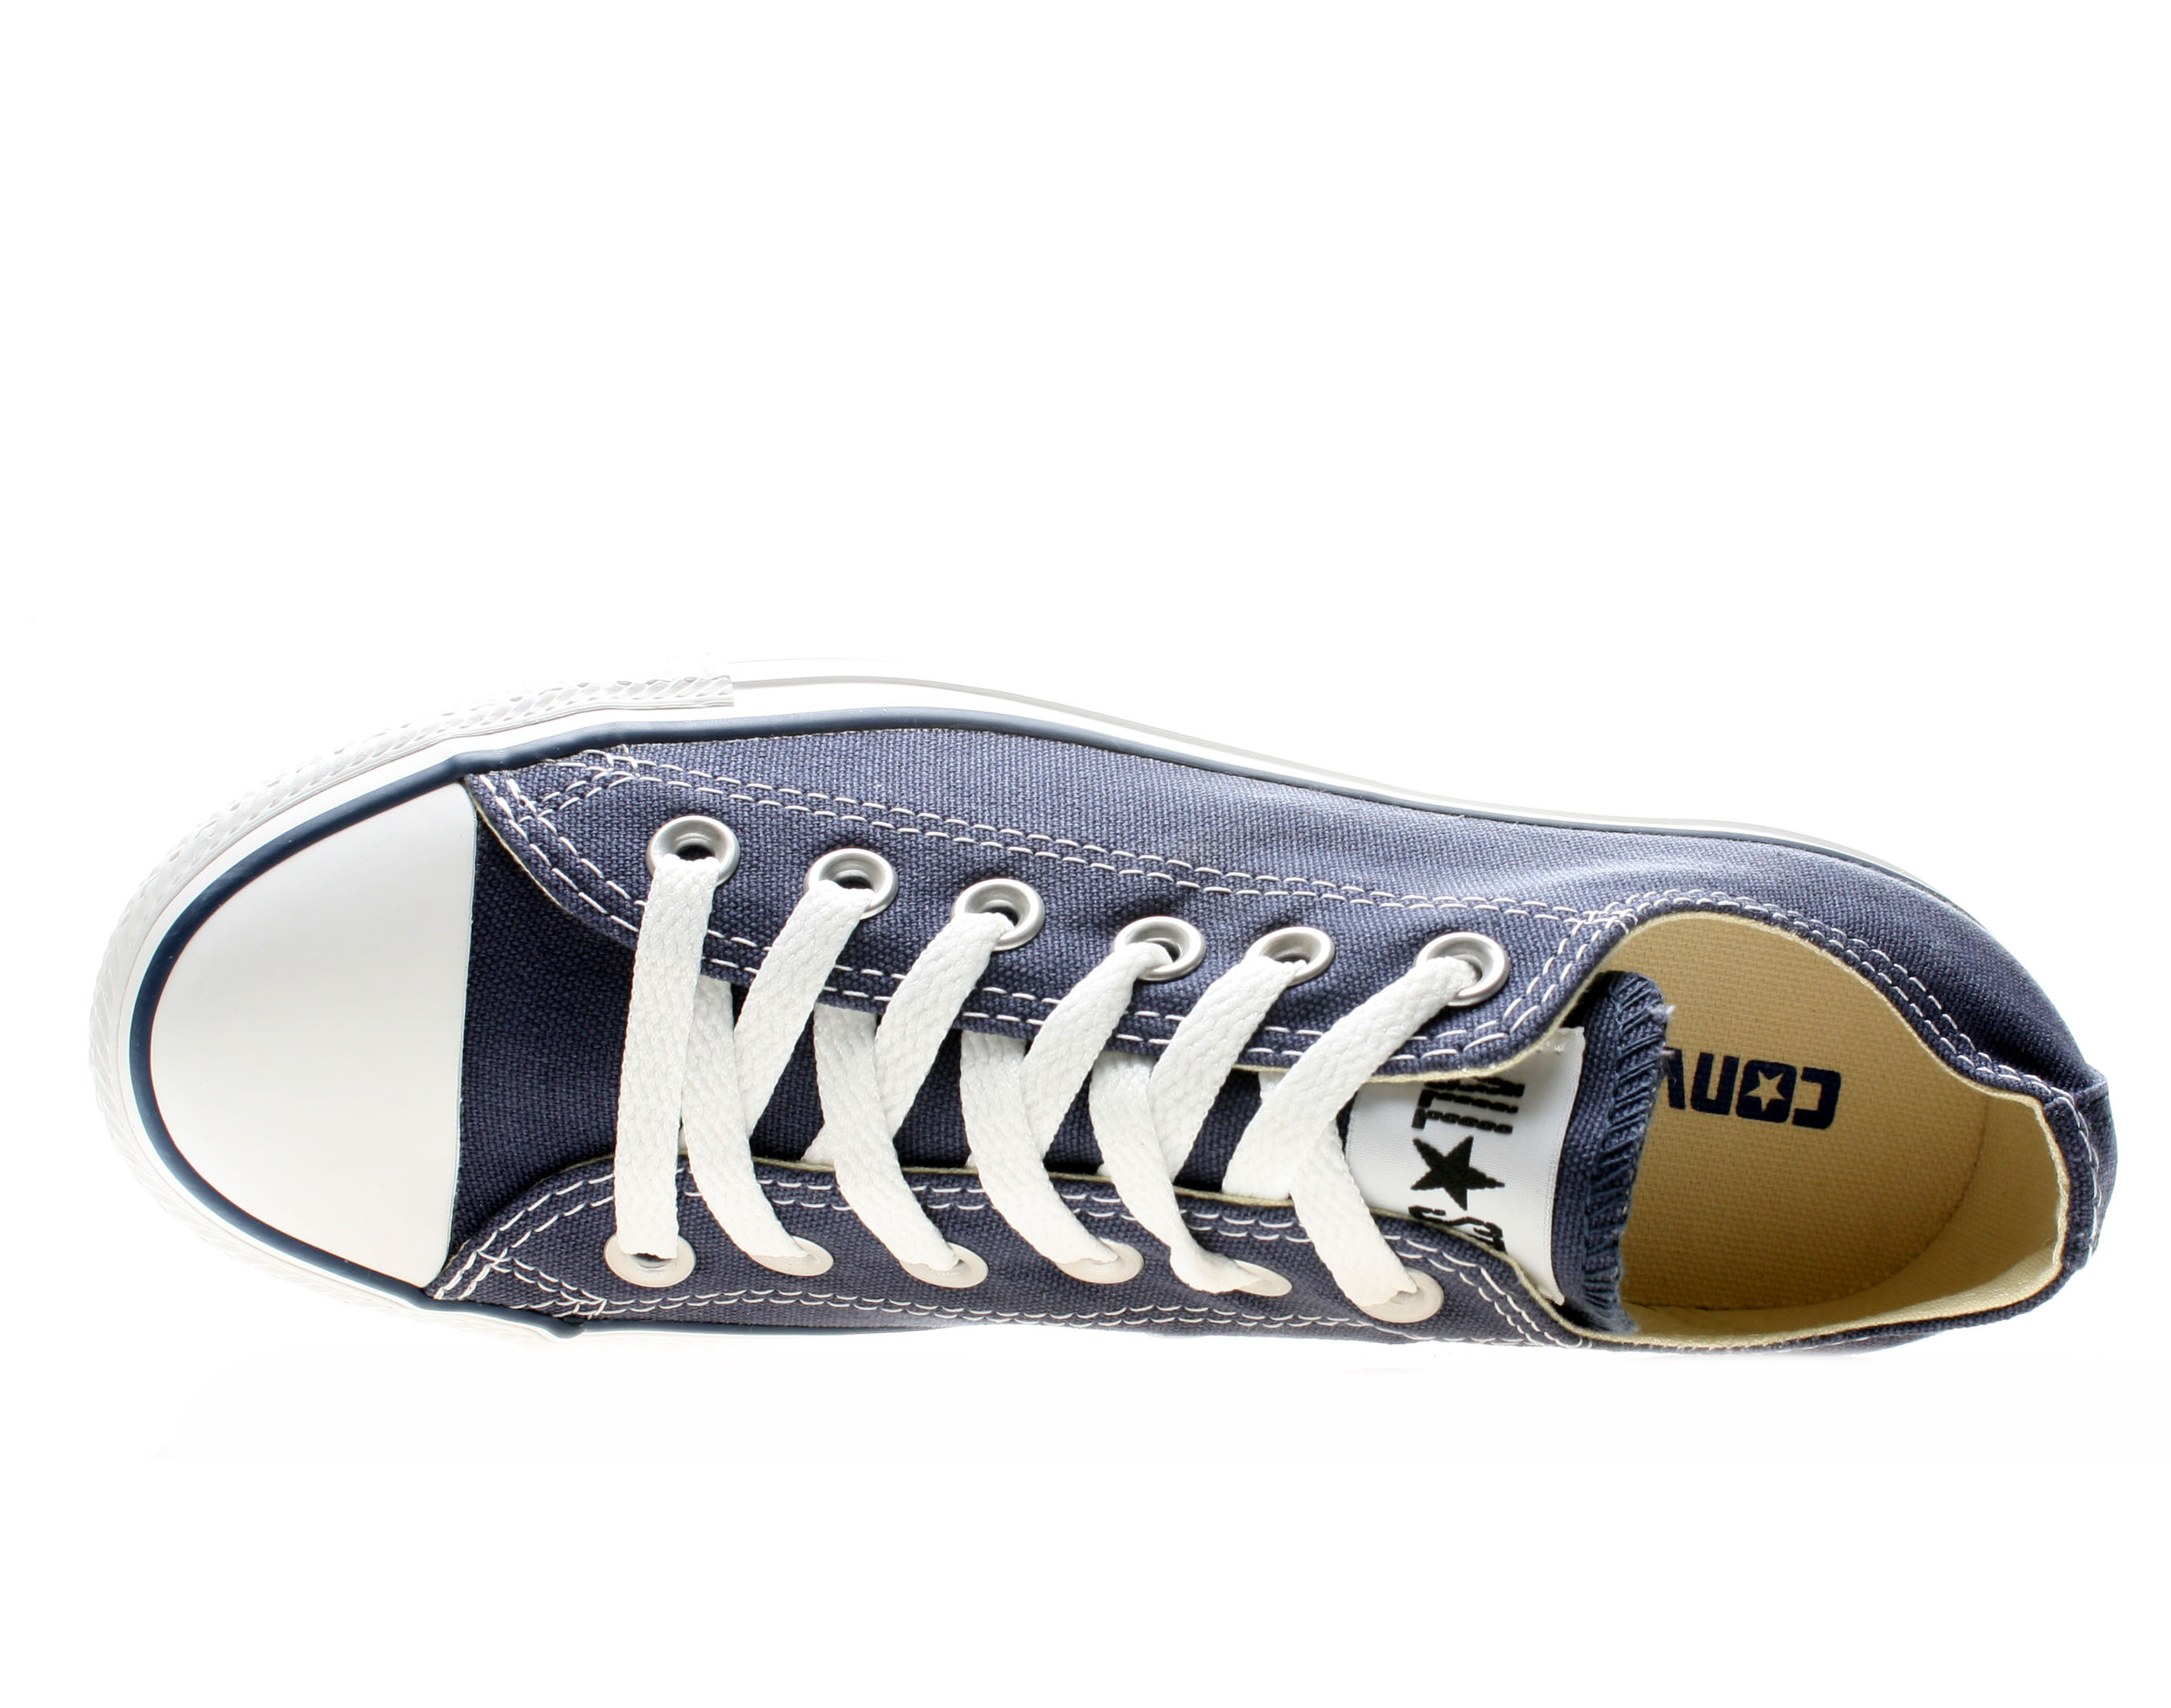 Converse Chuck Taylor All Star Low Sneaker - image 4 of 6